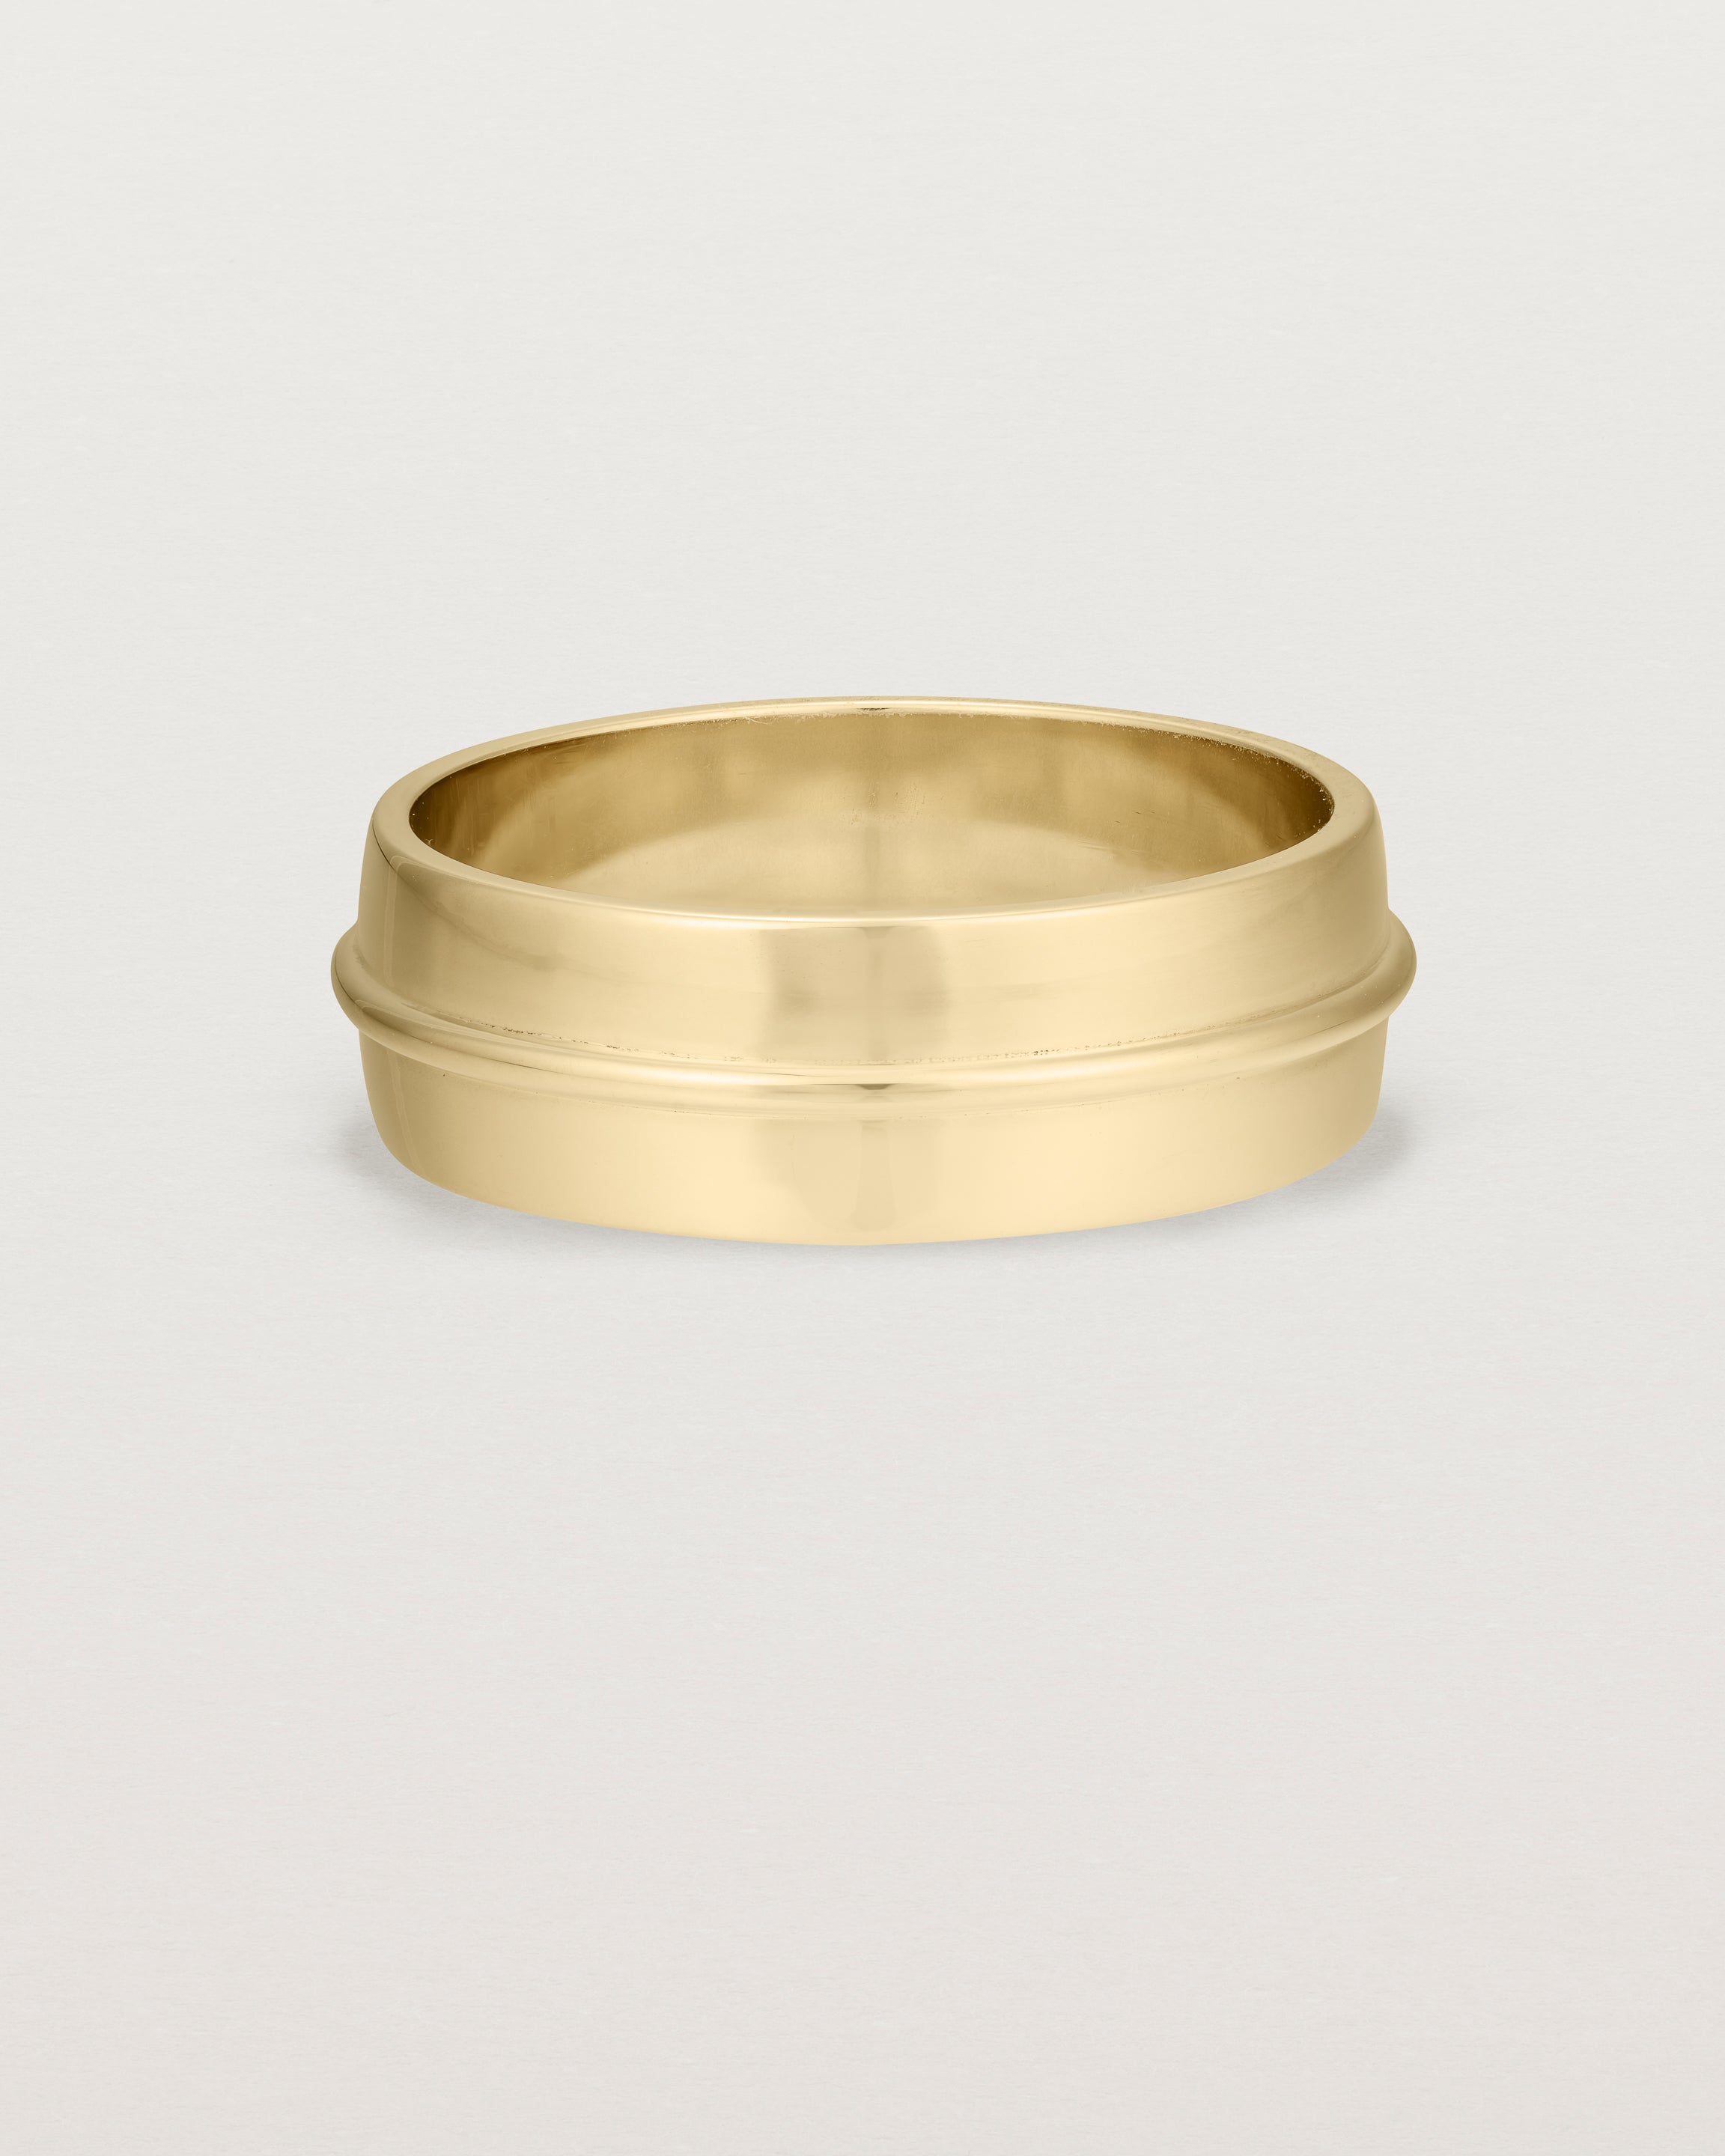 Front view of the Seam Wedding Ring | 7mm | Yellow Gold.